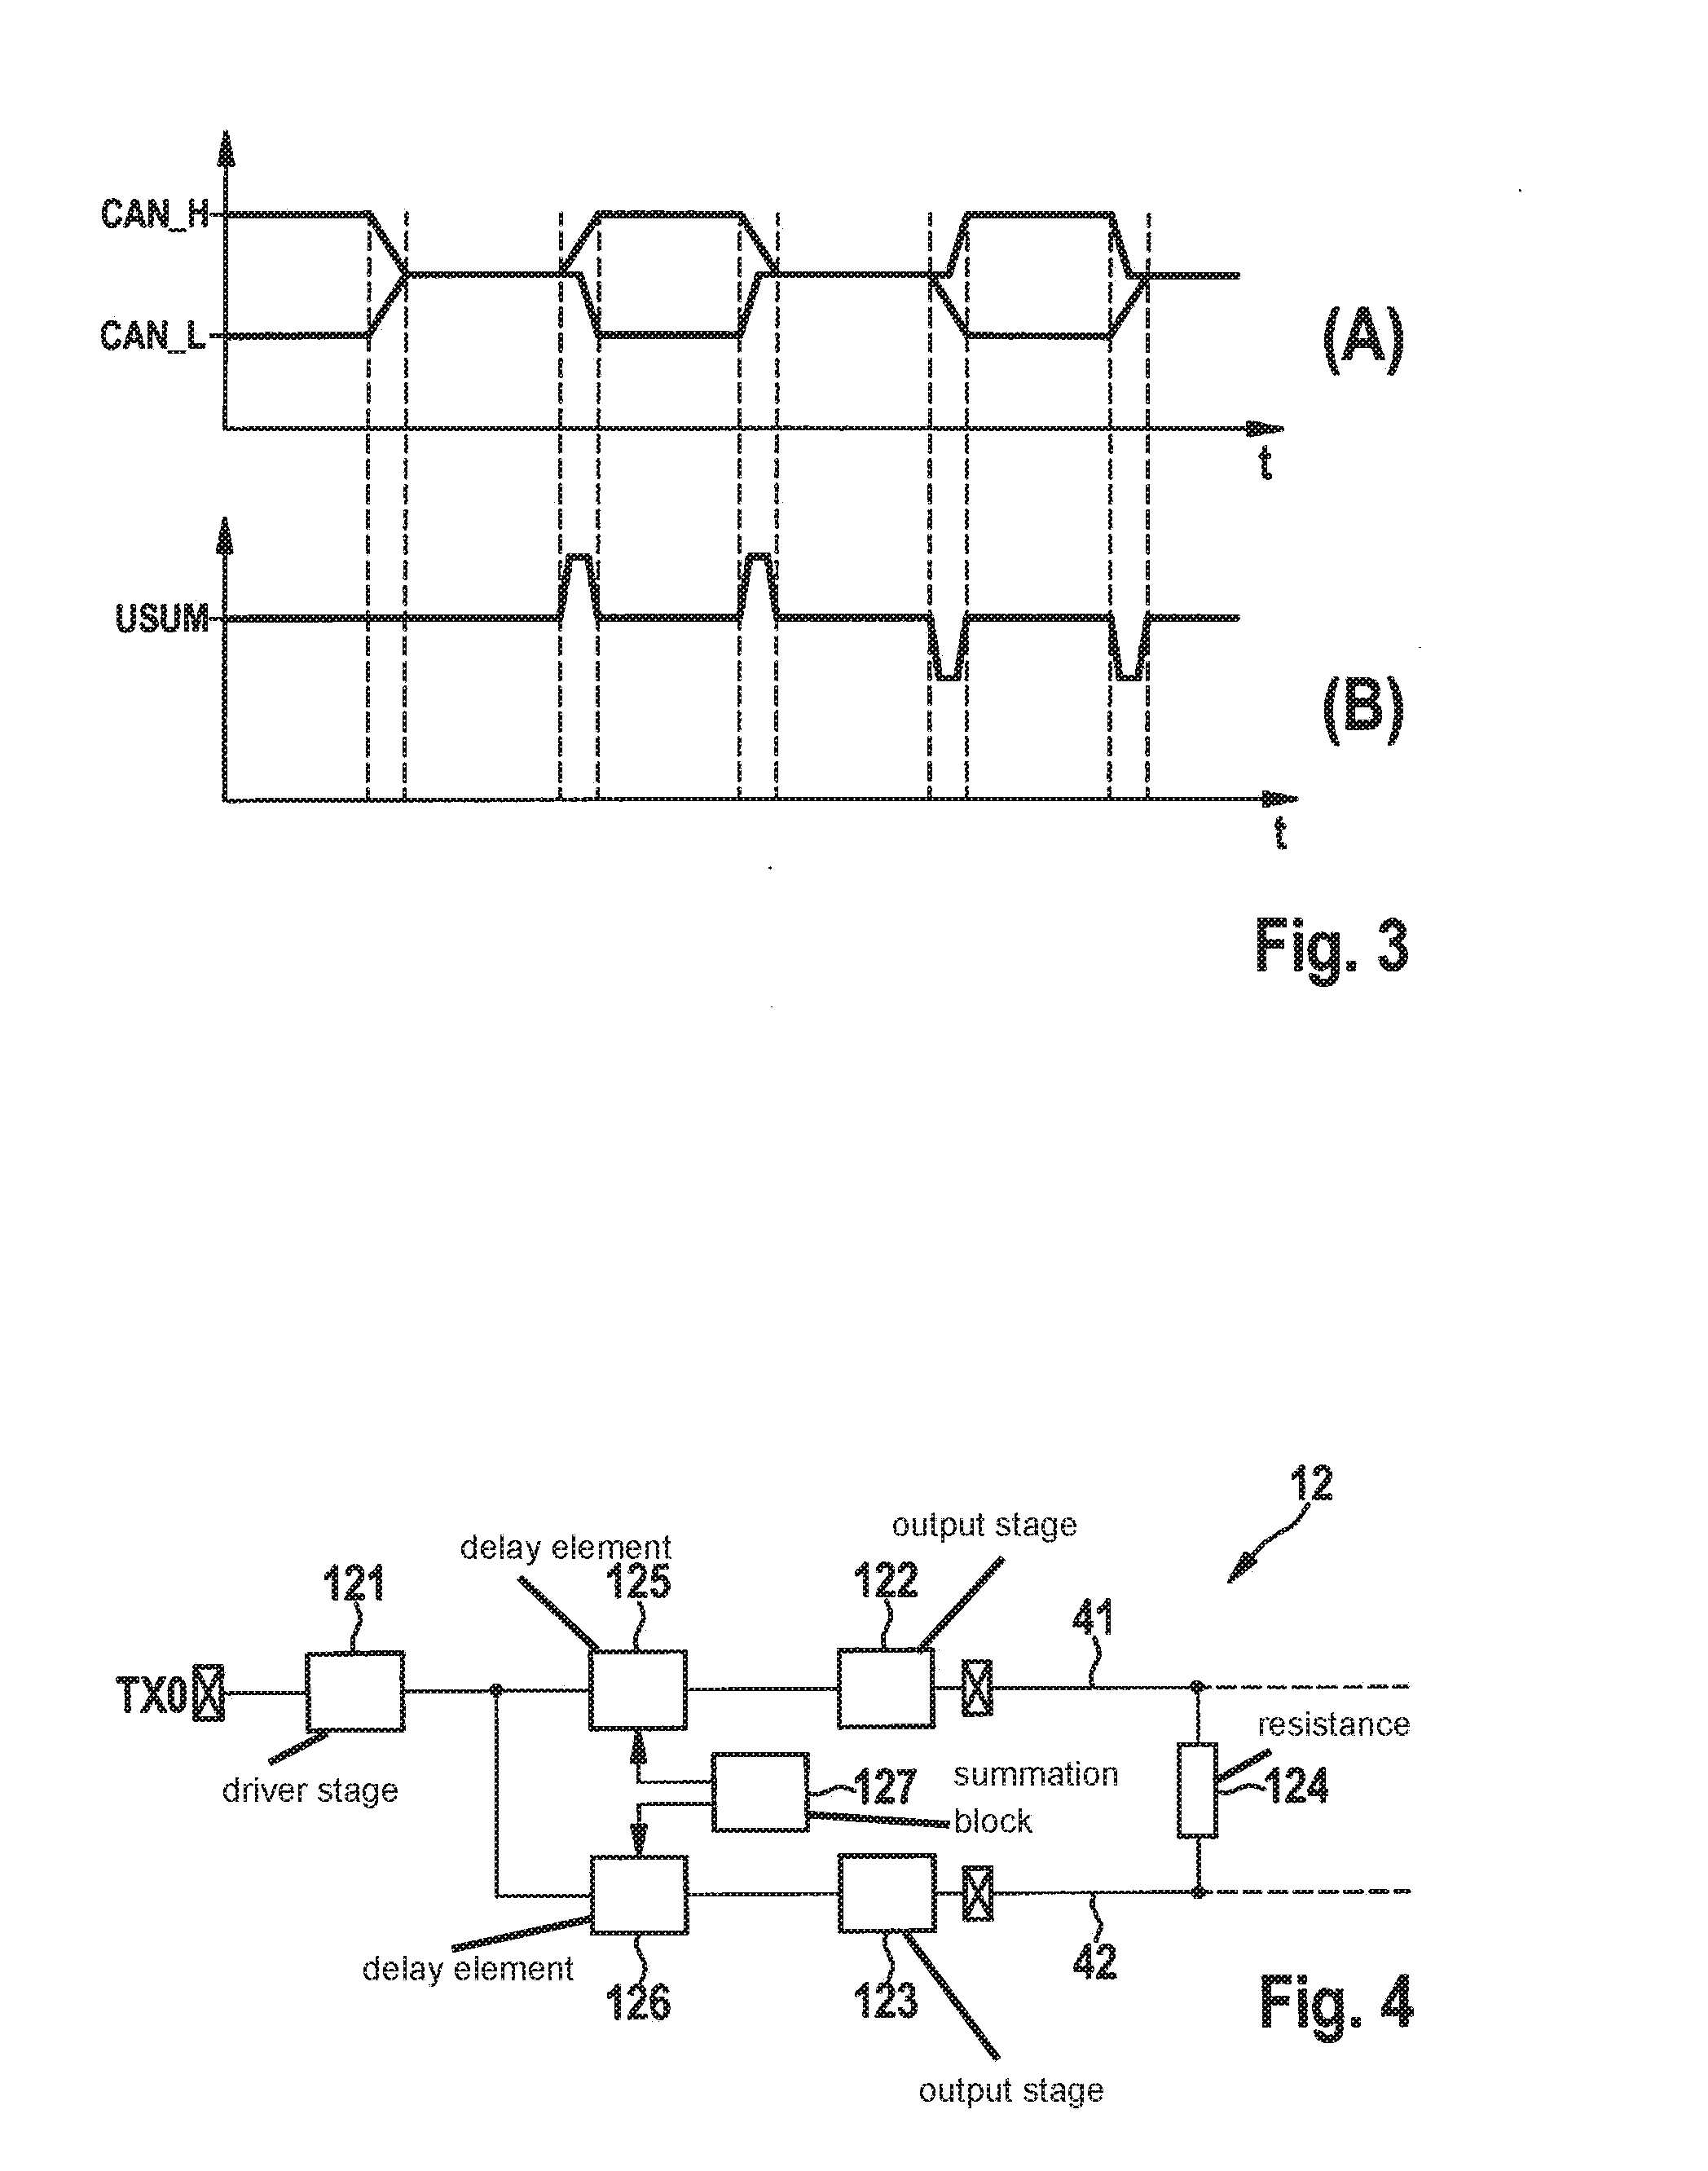 Subscriber station for a bus system and method for reducing line-conducted emissions in a bus system